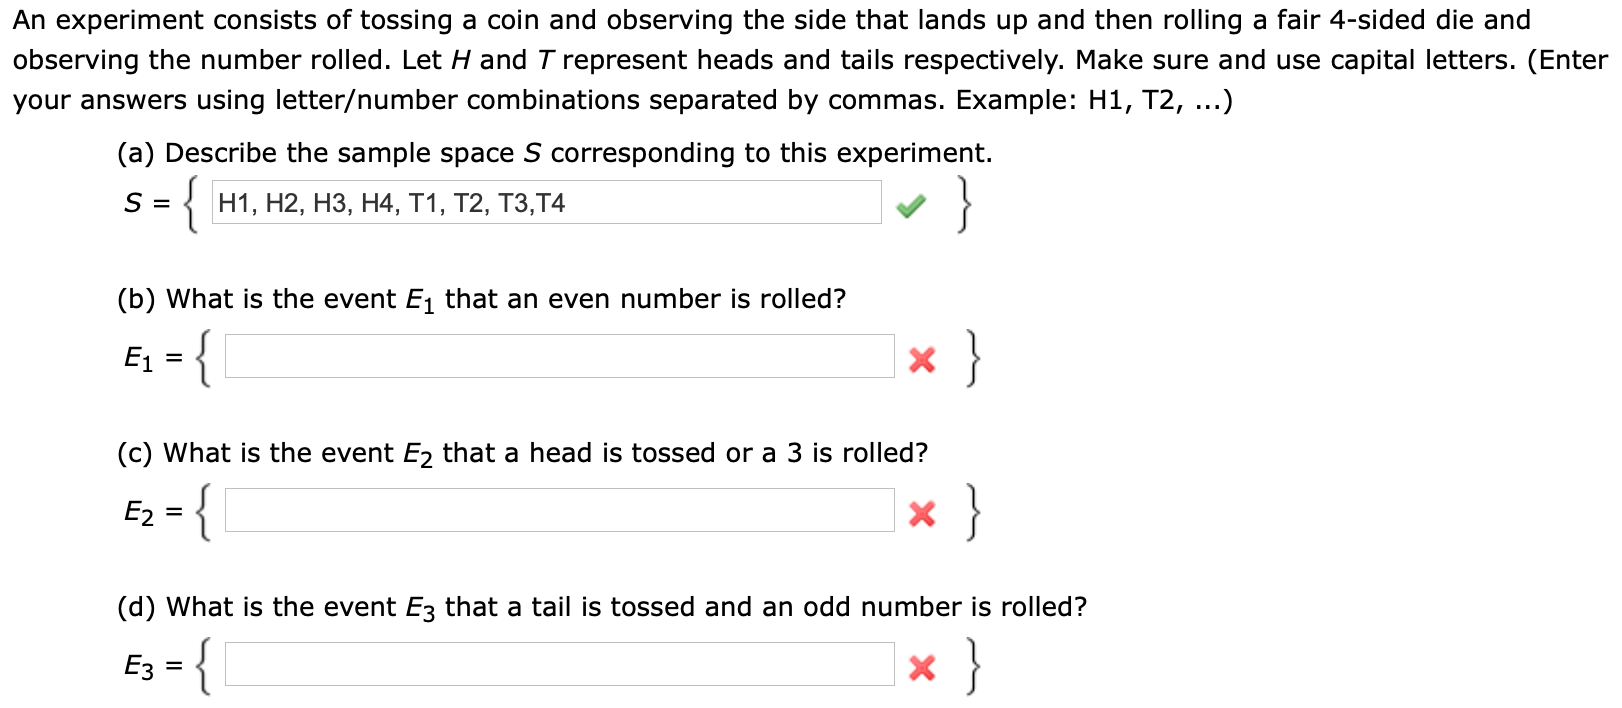 An experiment consists of tossing a coin and observing the side that lands up and then rolling a fair 4-sided die and
observing the number rolled. Let H and T represent heads and tails respectively. Make sure and use capital letters. (Enter
your answers using letter/number combinations separated by commas. Example: H1, T2, ...)
(a) Describe the sample space S corresponding to this experiment.
{
S =
н1, Н2, НЗ, Н4, т1, Т2, Т3,Т4
(b) What is the event E1 that an even number is rolled?
}
E1
}-
(c) What is the event E2 that a head is tossed or a 3 is rolled?
}
- {
E2
X
(d) What is the event E3 that a tail is tossed and an odd number is rolled?
{
Ез
X
=
